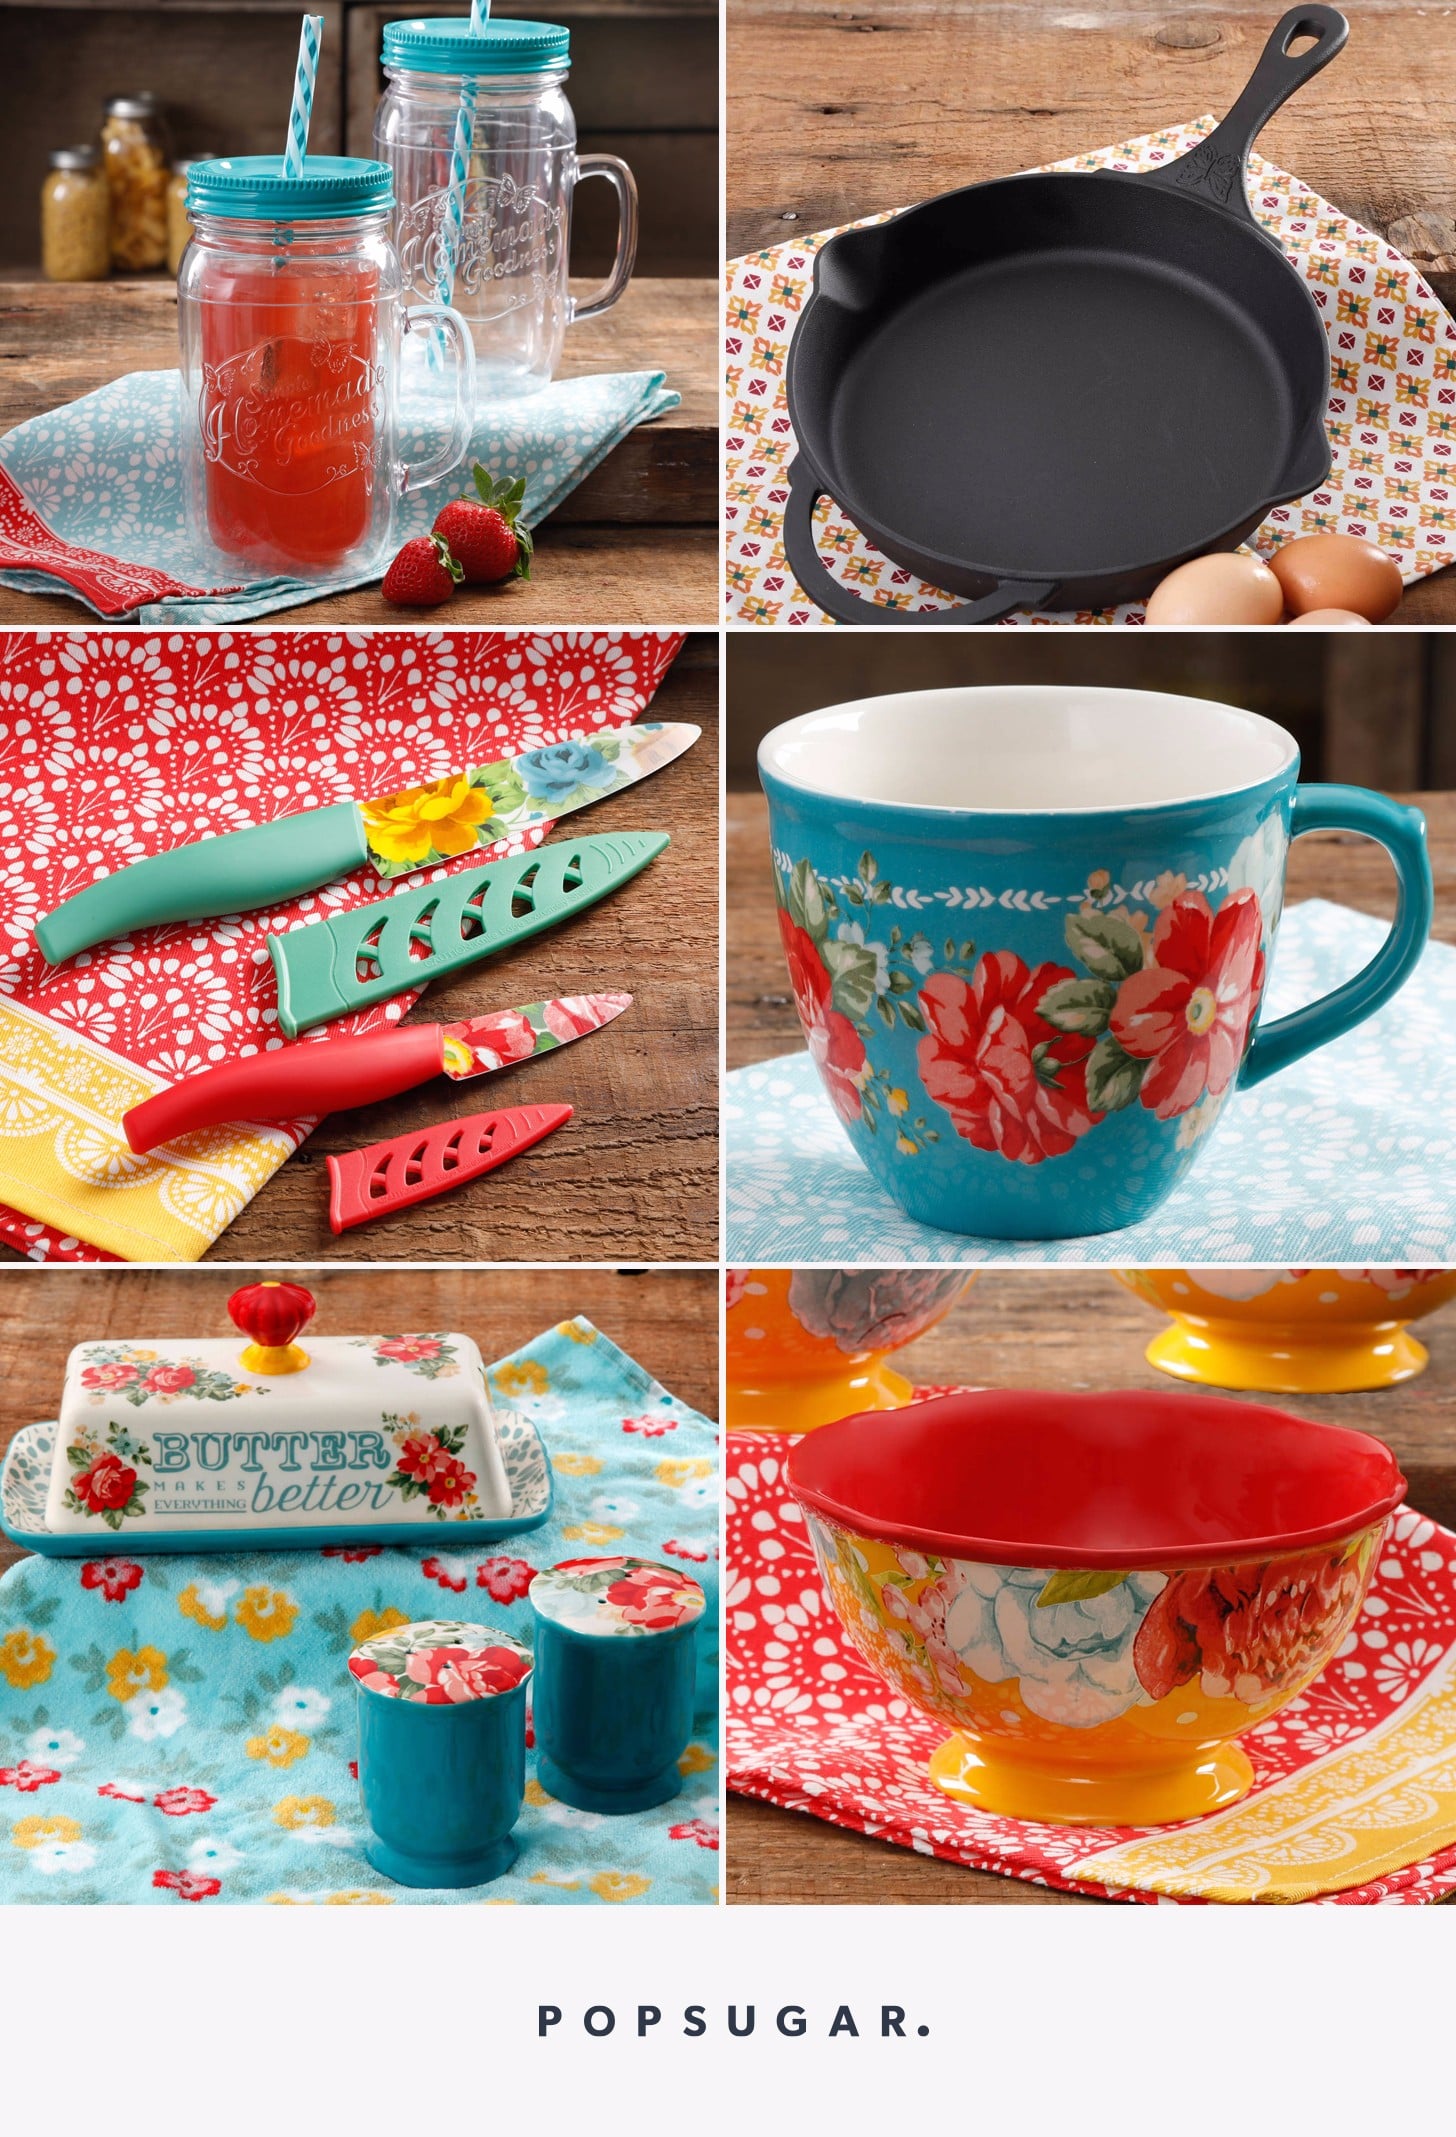 The Pioneer Woman Rustic Floral Silicone, 25-Piece Gadget Set, Red